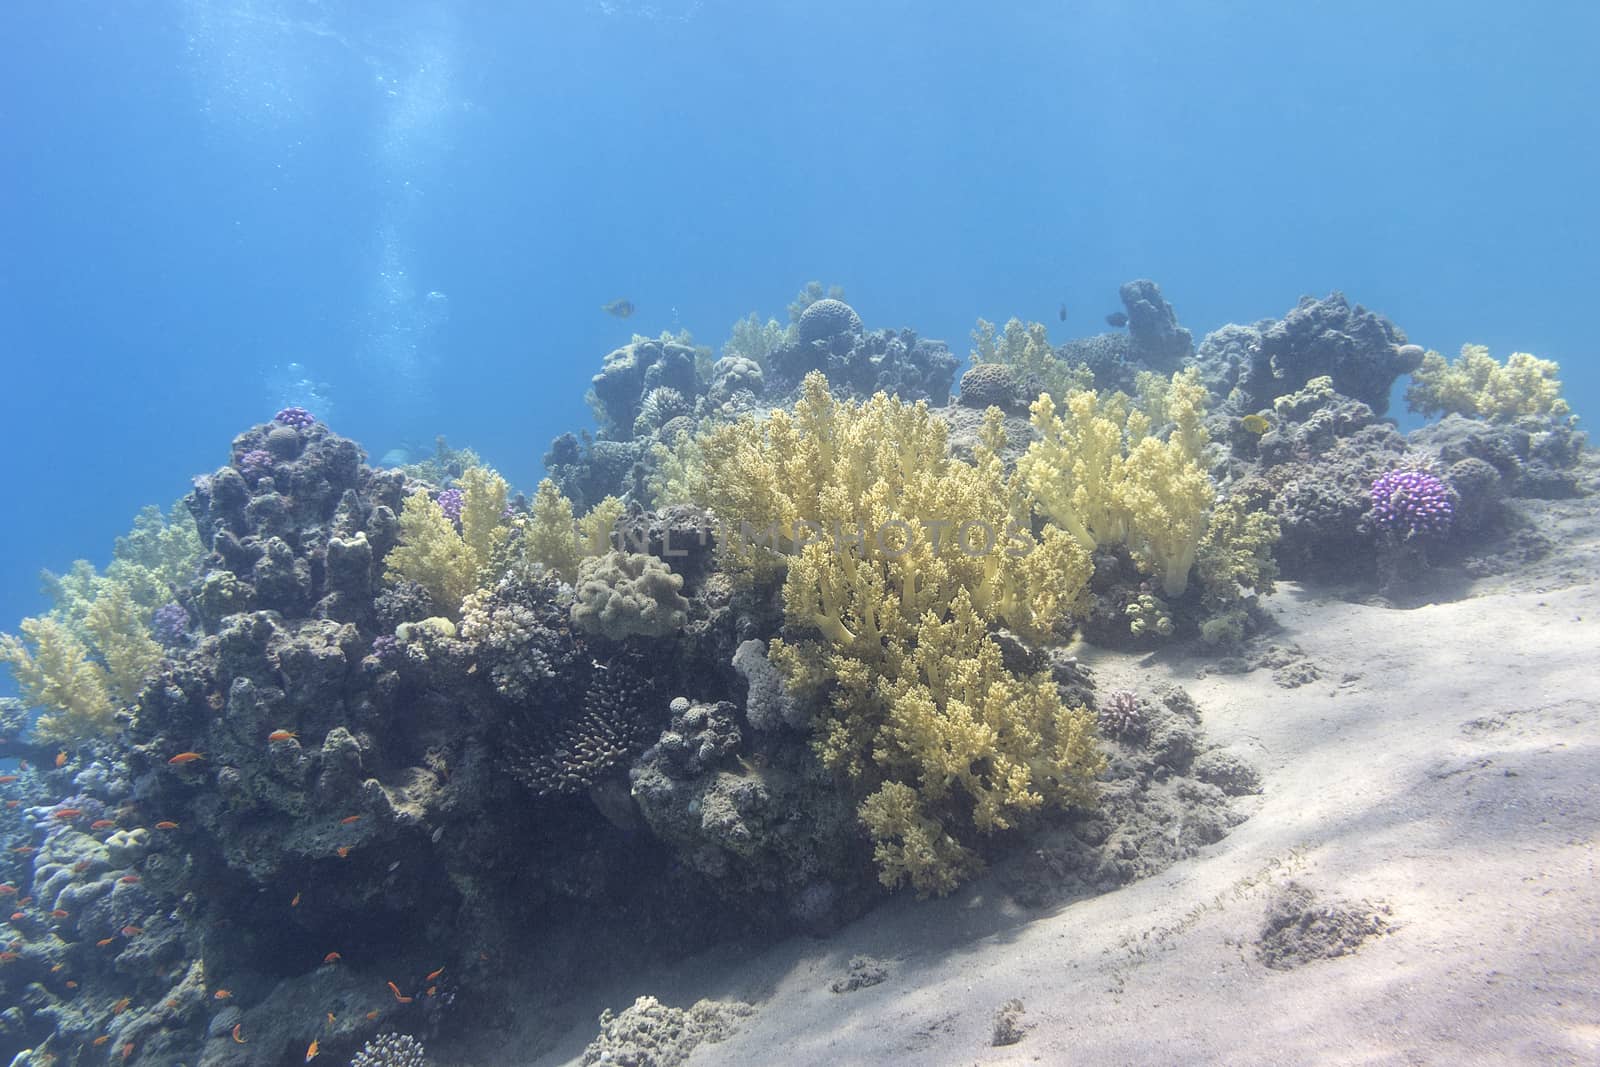 colorful coral reef at the bottom of tropical sea, underwater